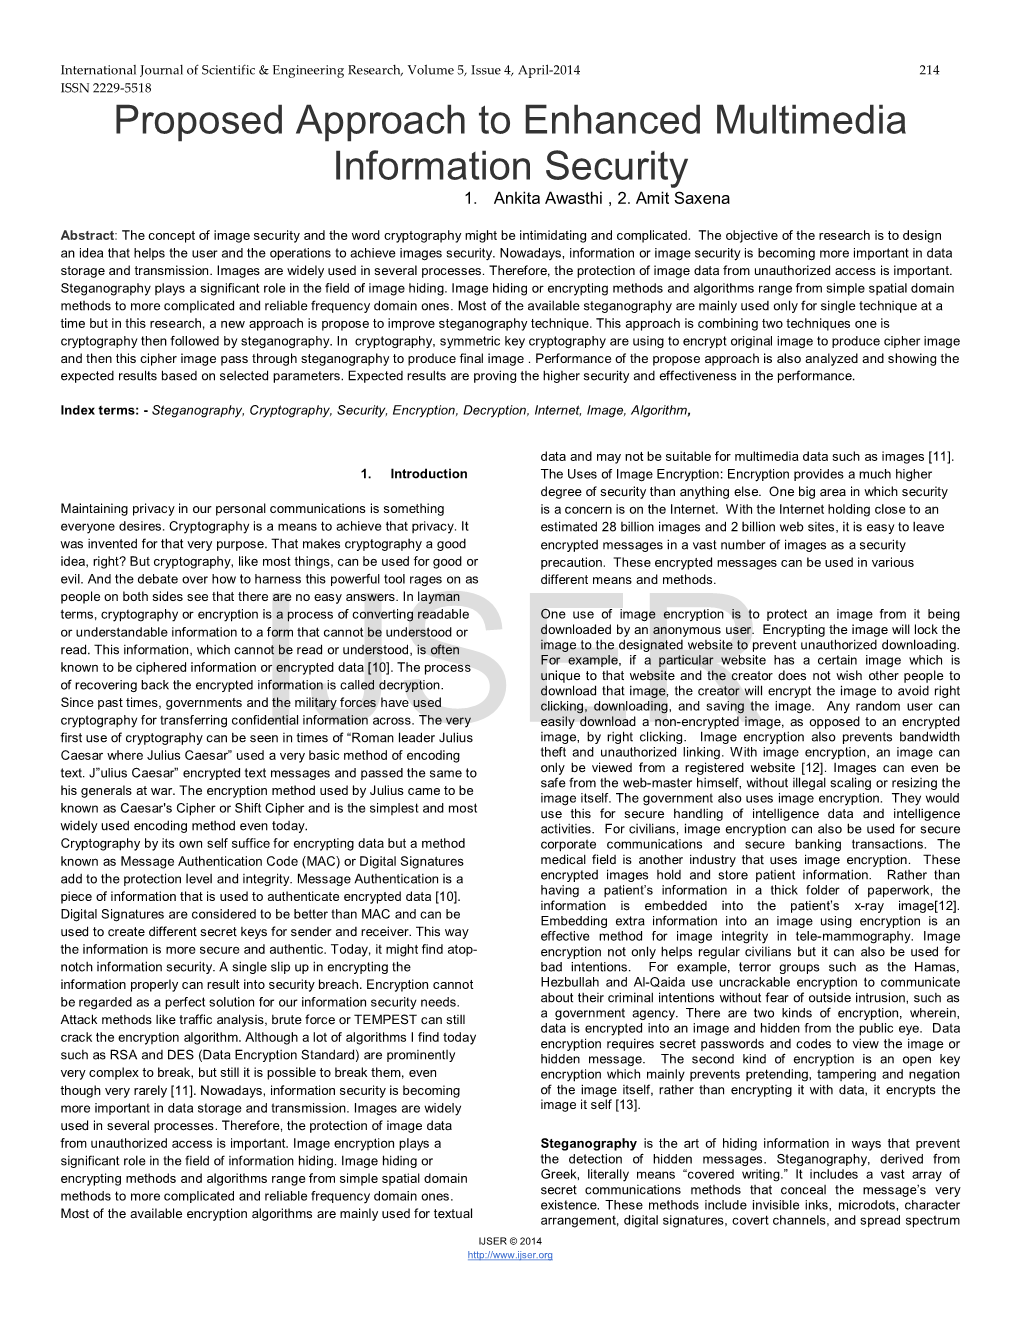 Proposed Approach to Enhanced Multimedia Information Security 1